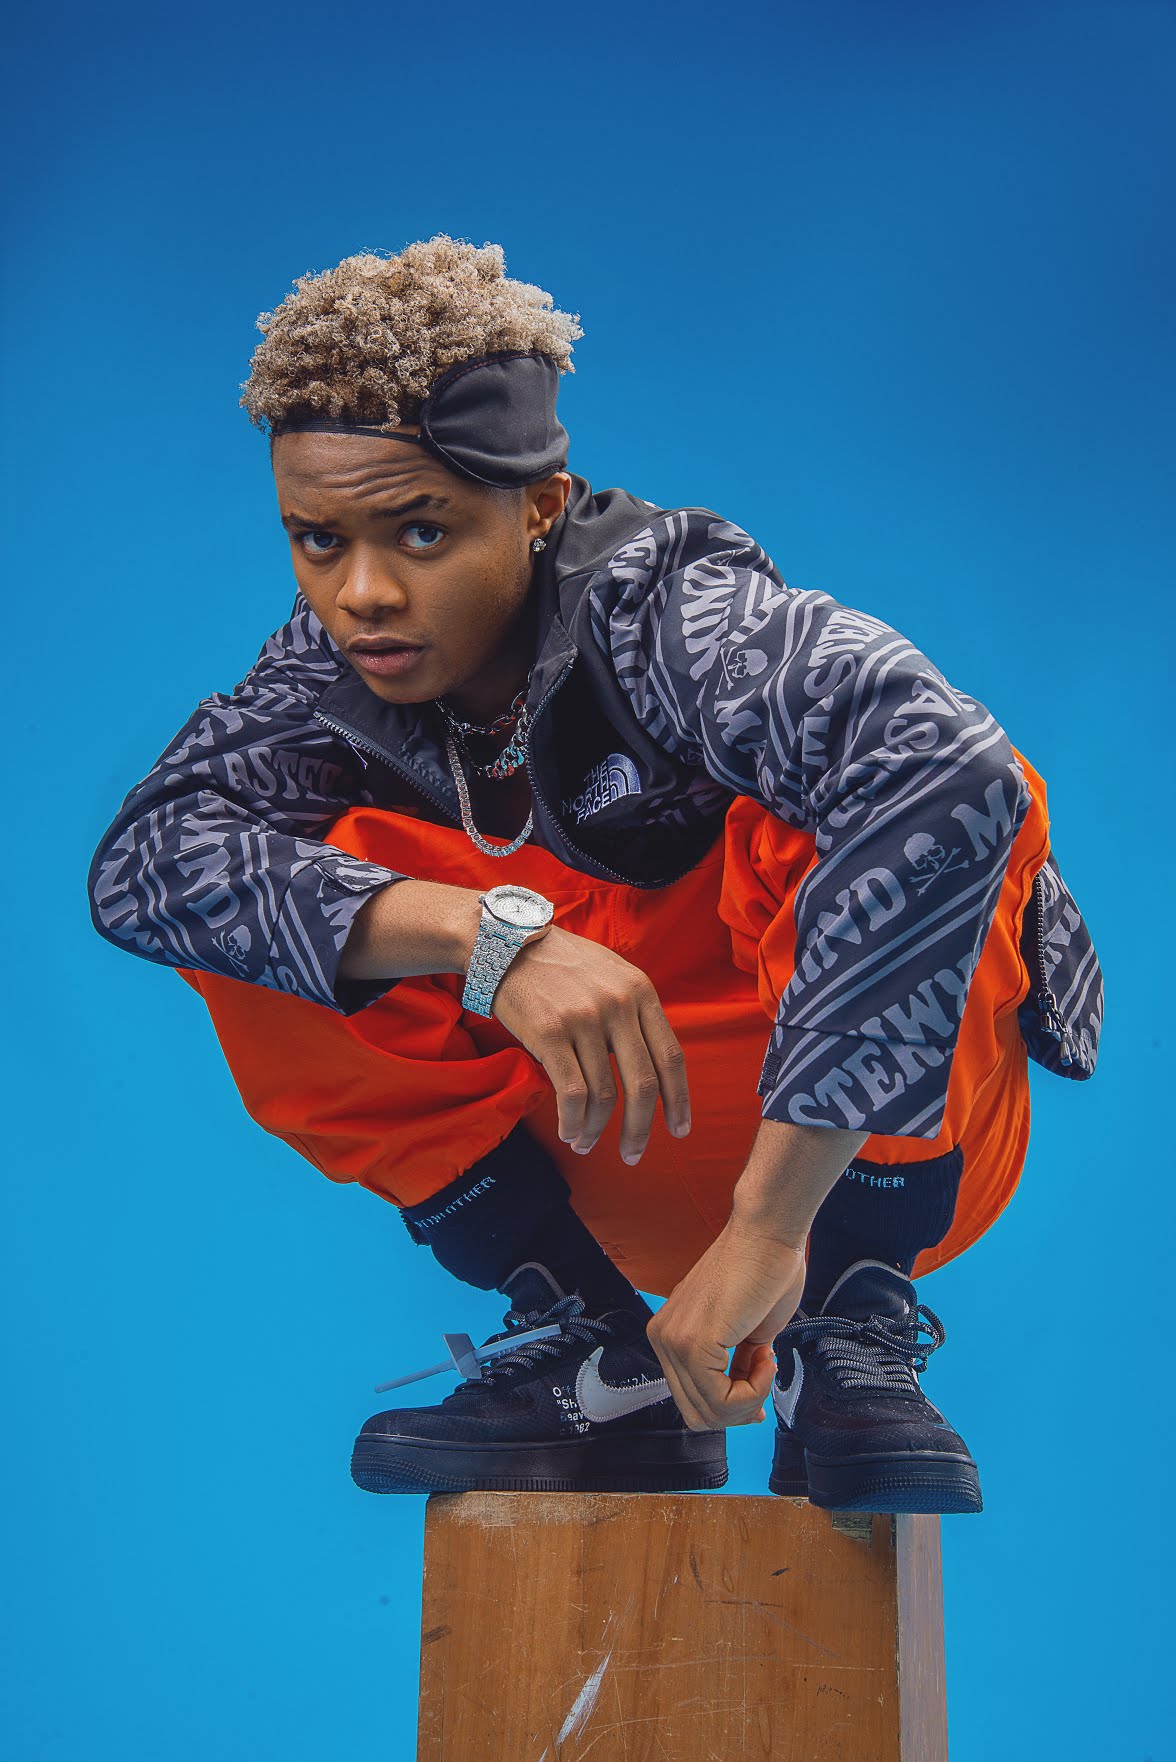 Crayon Sounds More Wizkid Than Rema (Here Is Why)